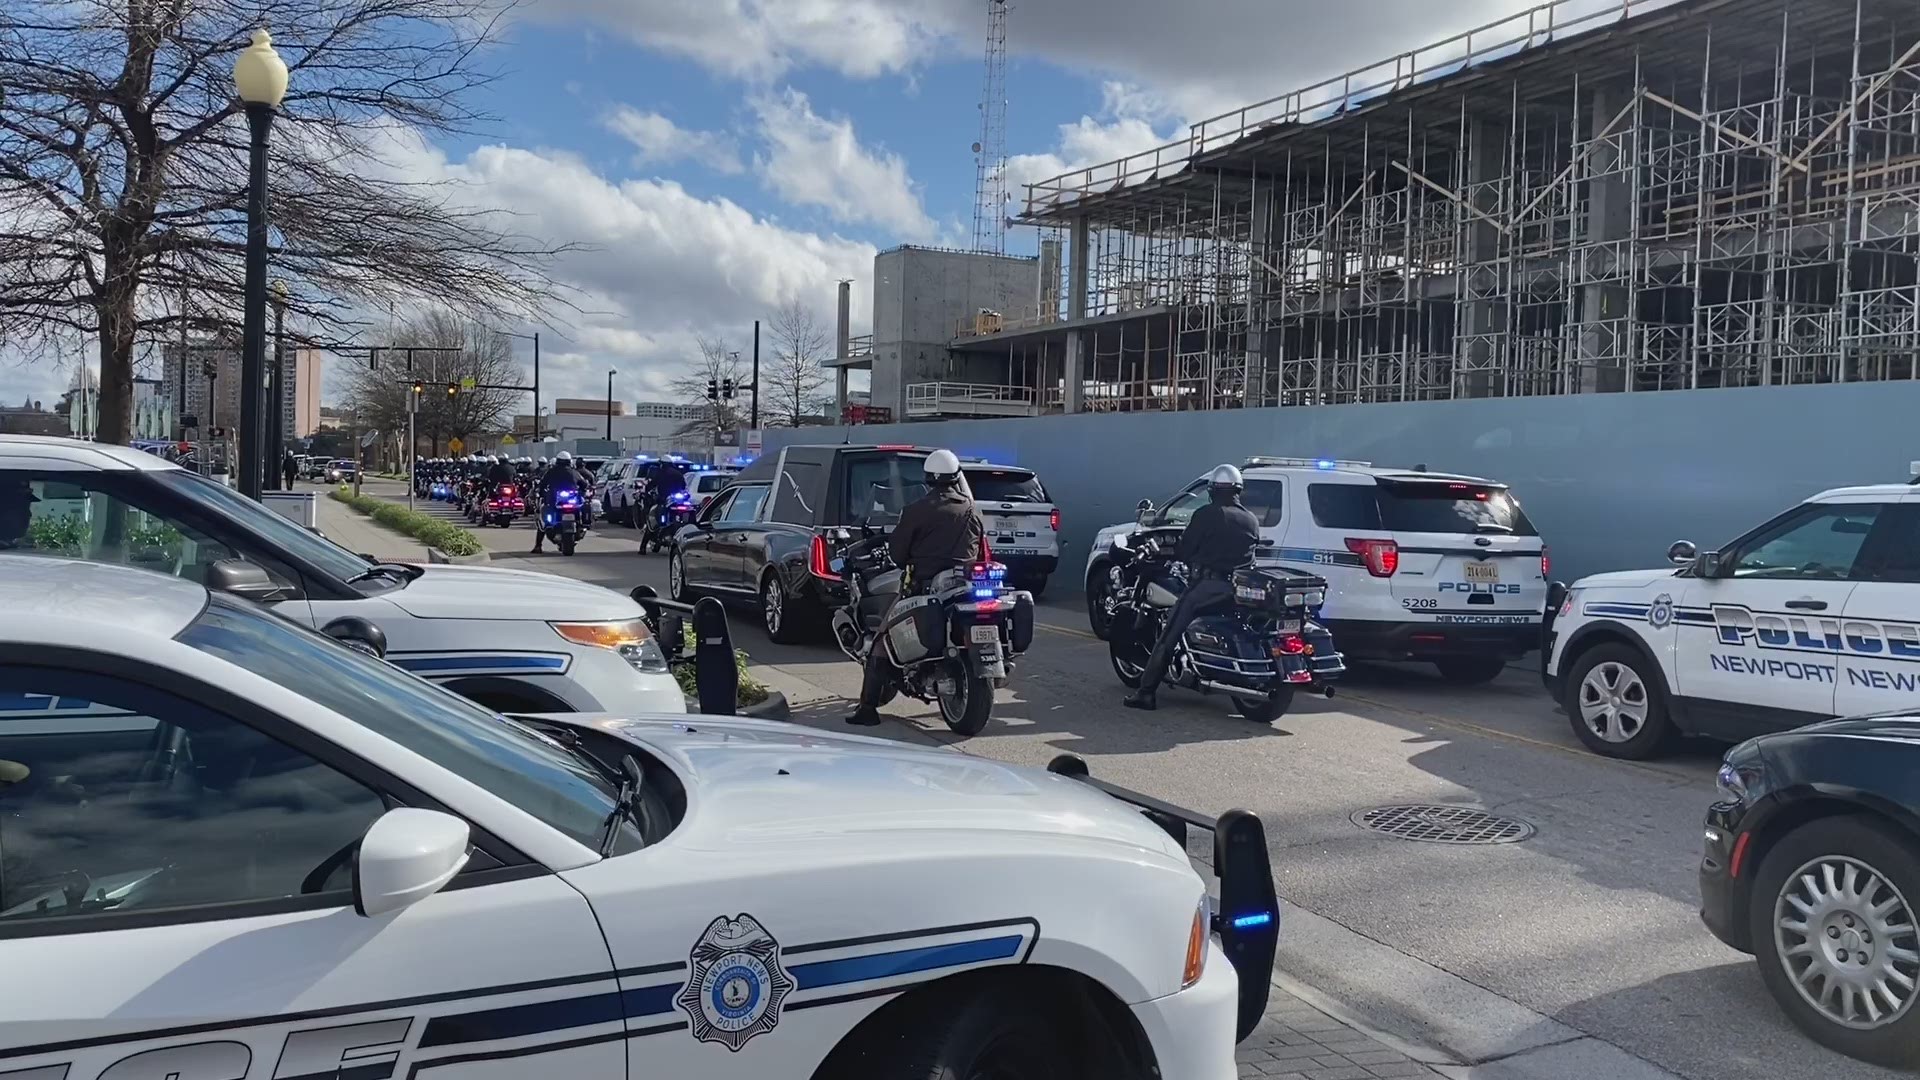 The procession took the body of fallen officer Katie Thyne from the medical examiner’s office in Norfolk to Altmeyer Funeral Home in Newport News.